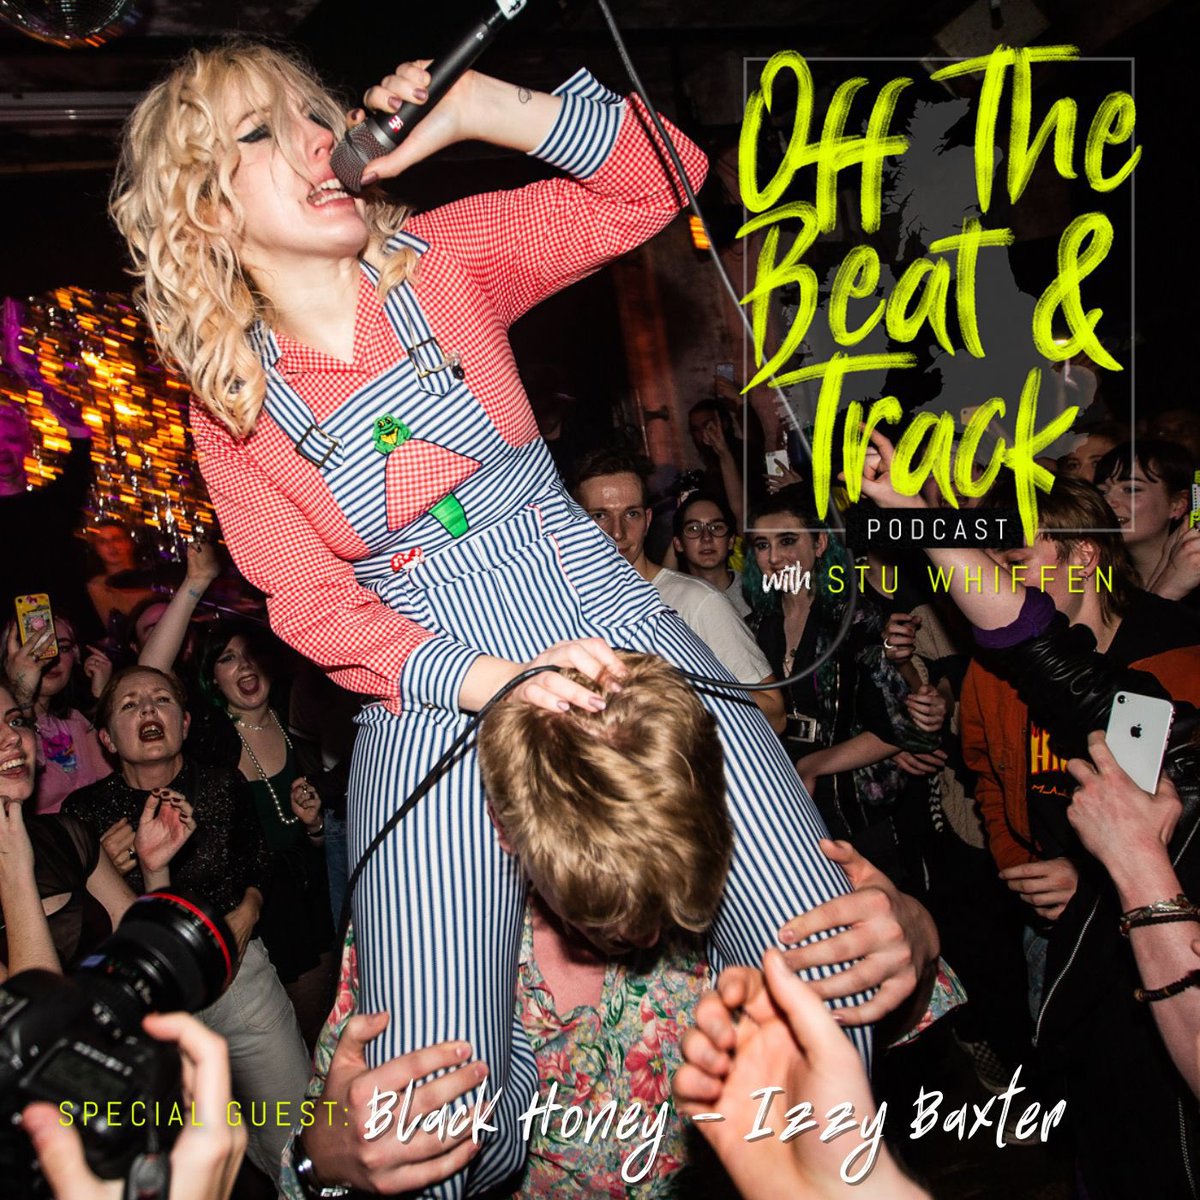 NEW @beatandtrackpod EPISODE! Host @stuwhiffen caught up with Izzy from @BLACKHONEYUK to chat tunes, life & more! Listen wherever you get your pods! LINK IN BIO